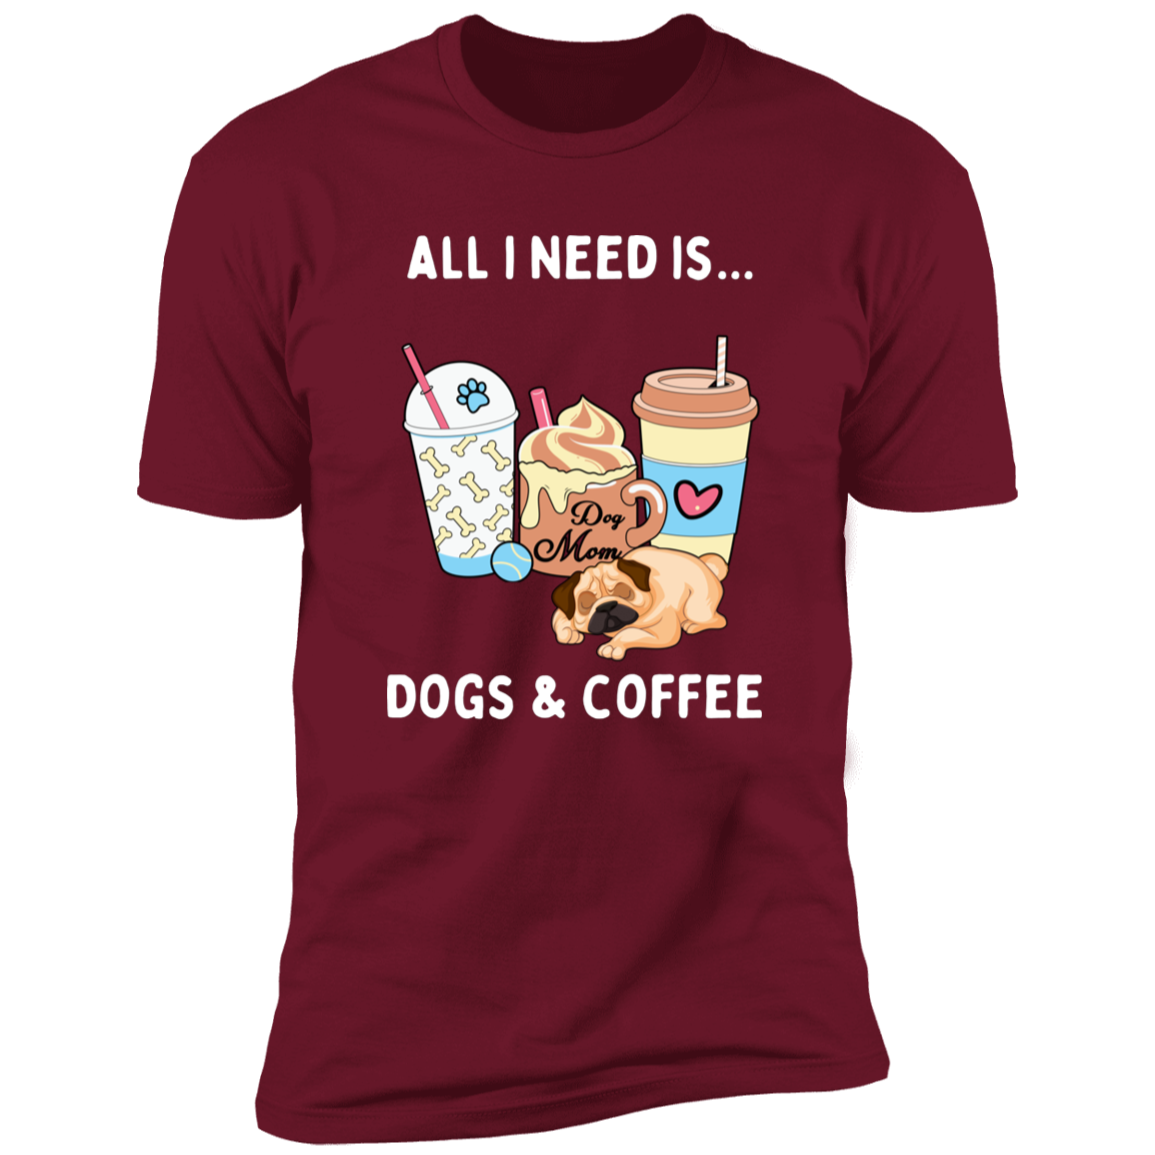 All I Need is Dogs and Coffee, Dog shirt for humas, in cardinal red